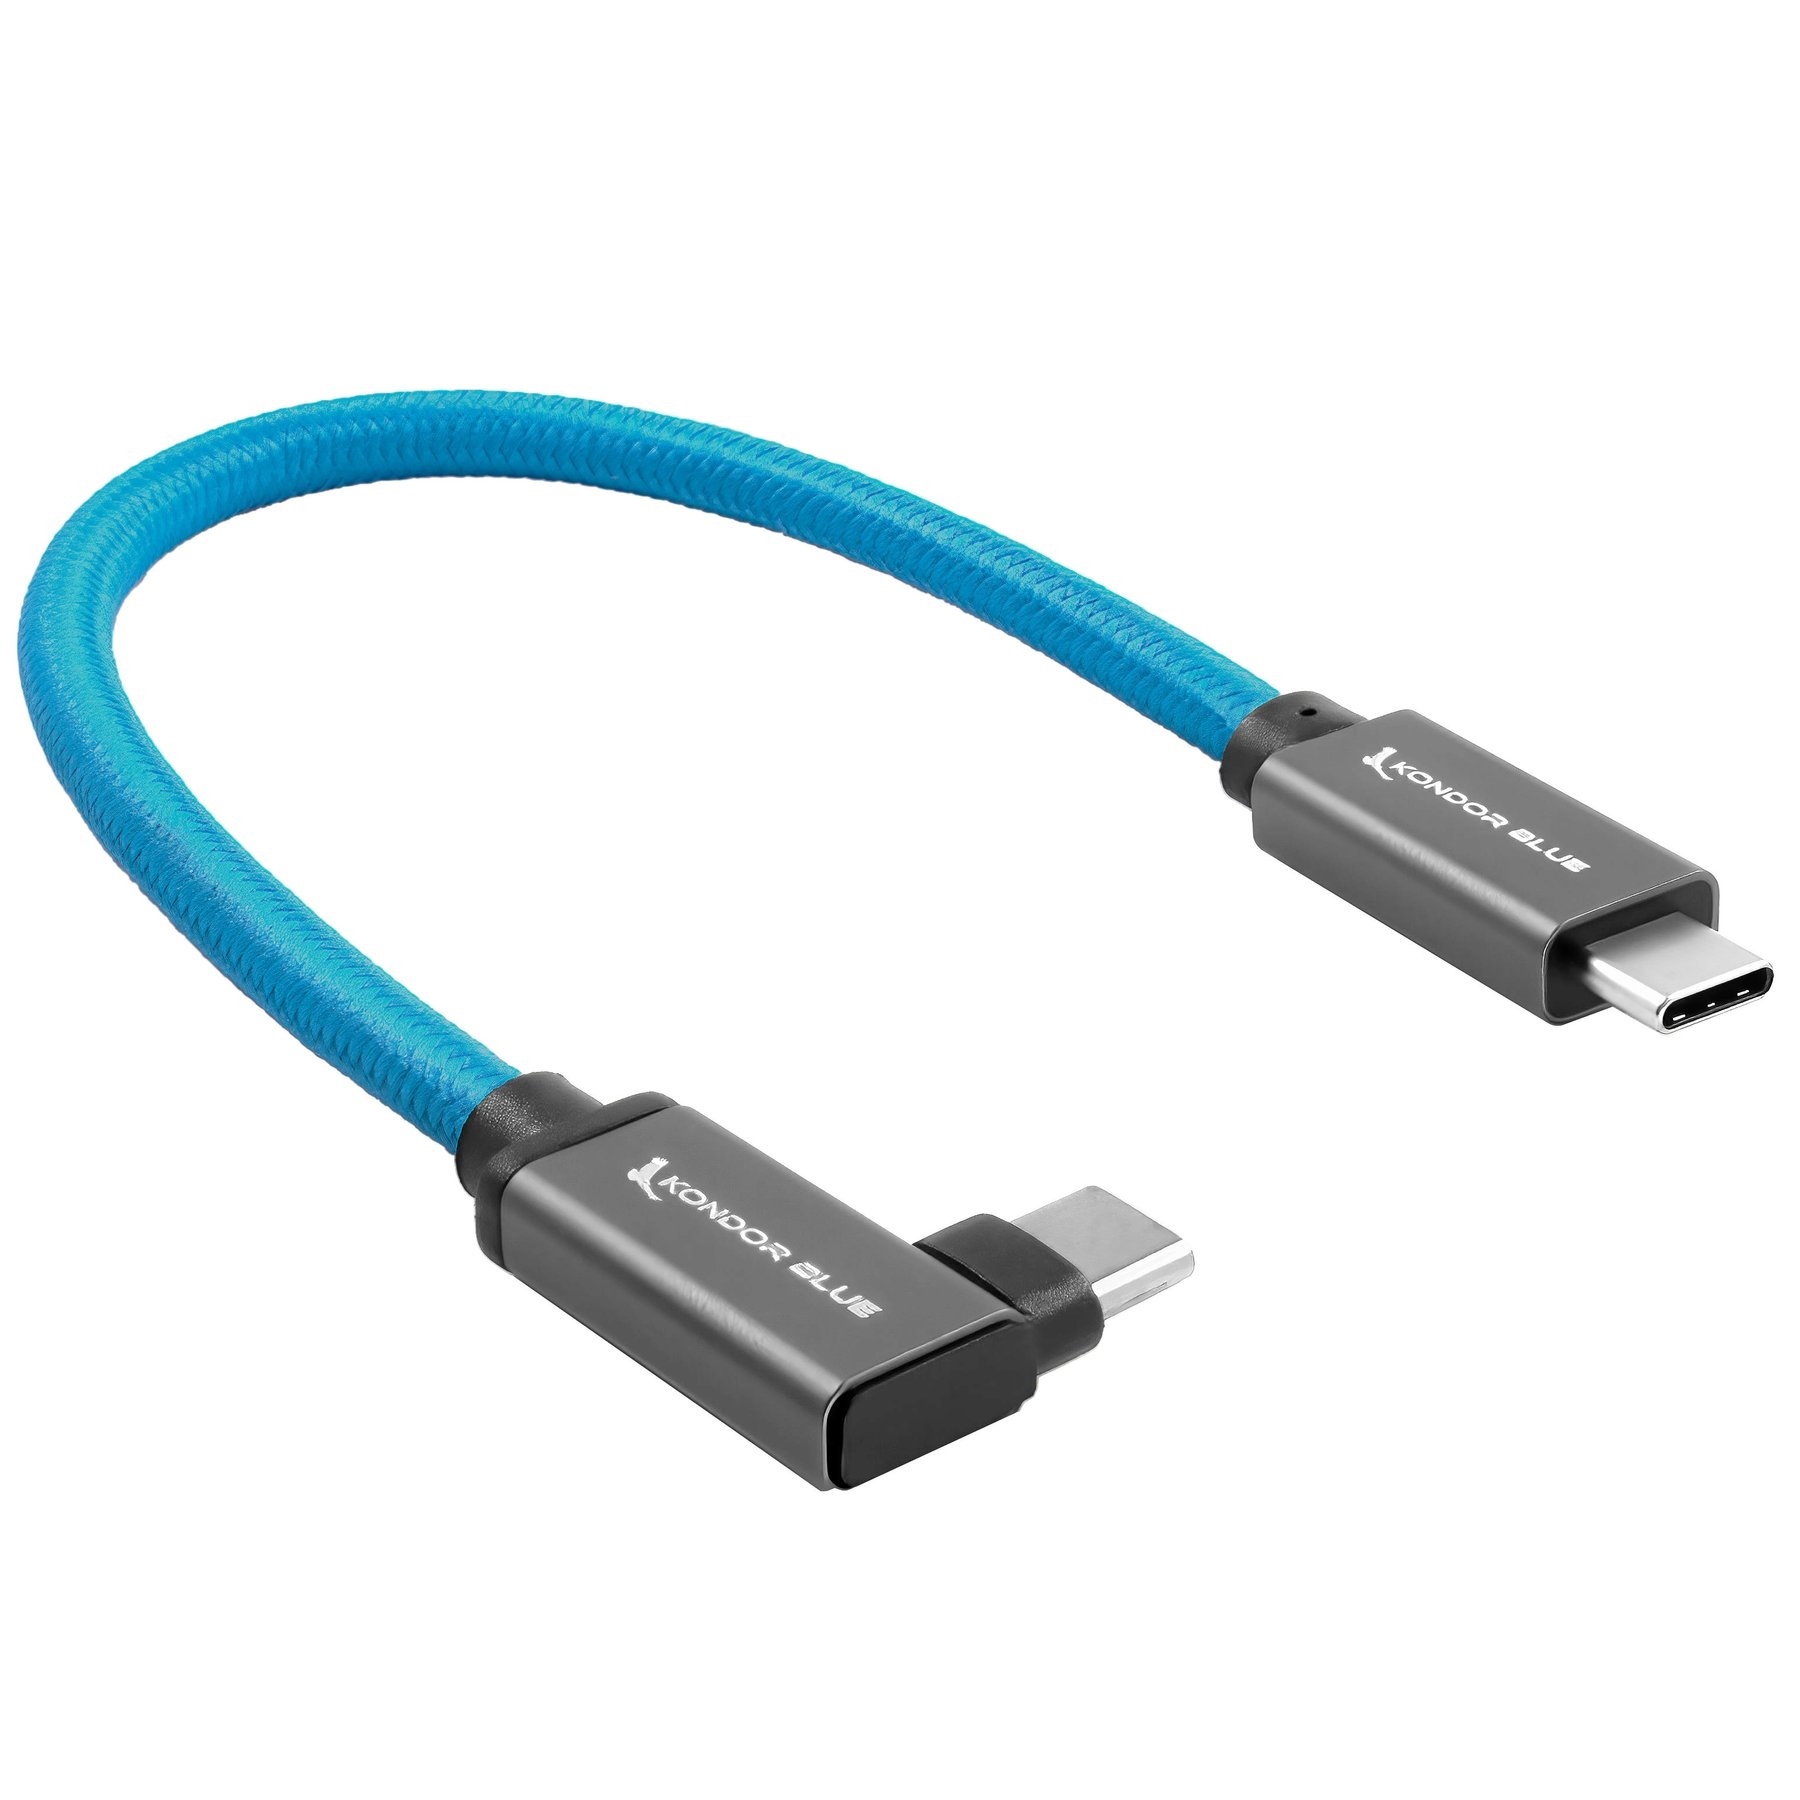 Kondor Blue USB C to USB C High Speed Cable for SSD Recording (Right Angle, 30cm)